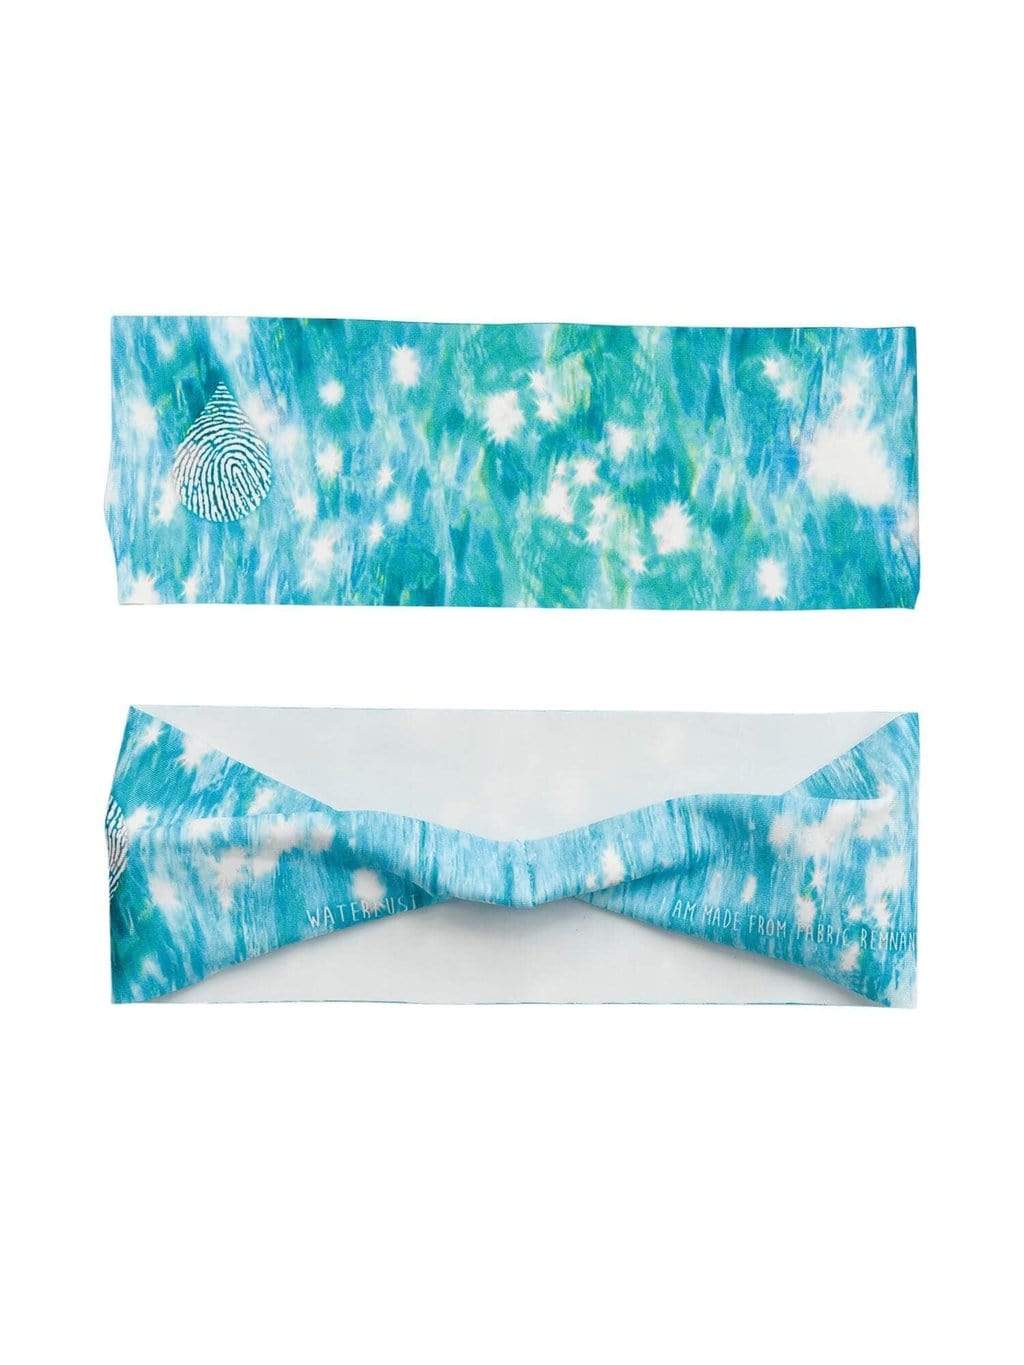 Waterlust Printed Headband Made From Pre-Consumer Waste Sun-Kissed Sea